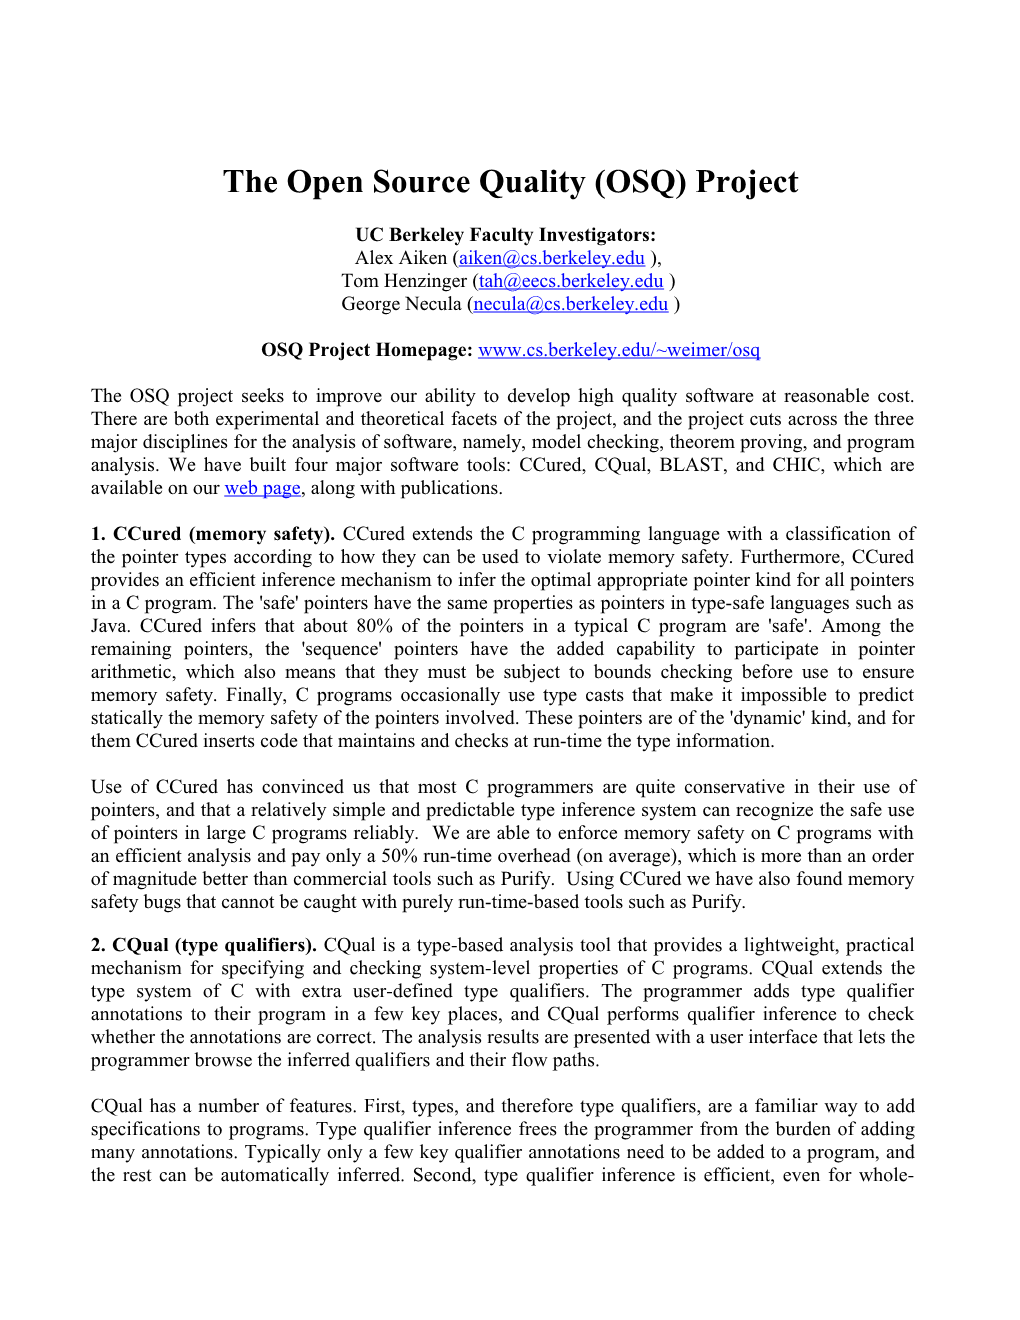 The Open Source Quality (OSQ) Project